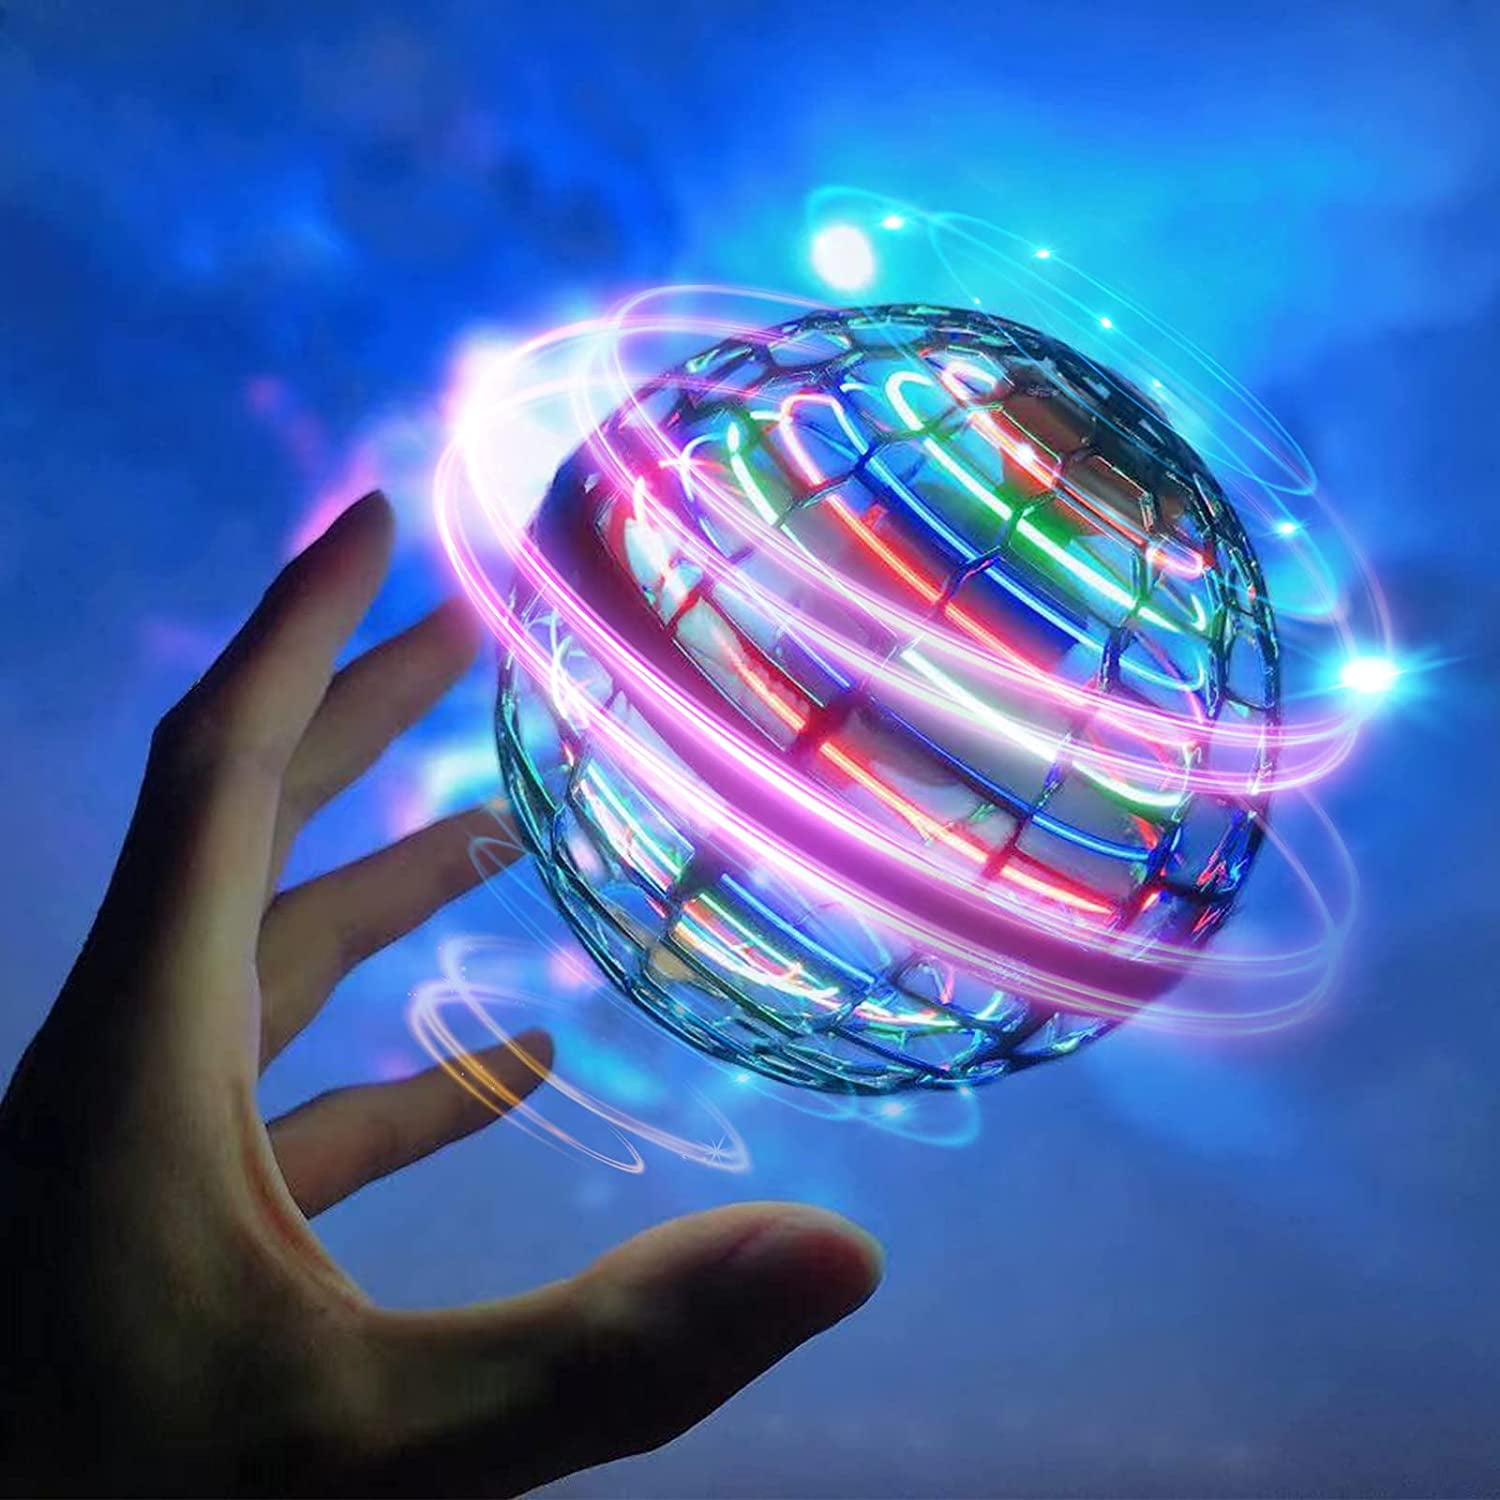 Flying Orb - Boomerang Orb Balls Magic Hand Controlled Flying Fidget  Spinners Built-in RGB Lights Mini Drones Boomerang Orb UFO Toy Safe for  Outside